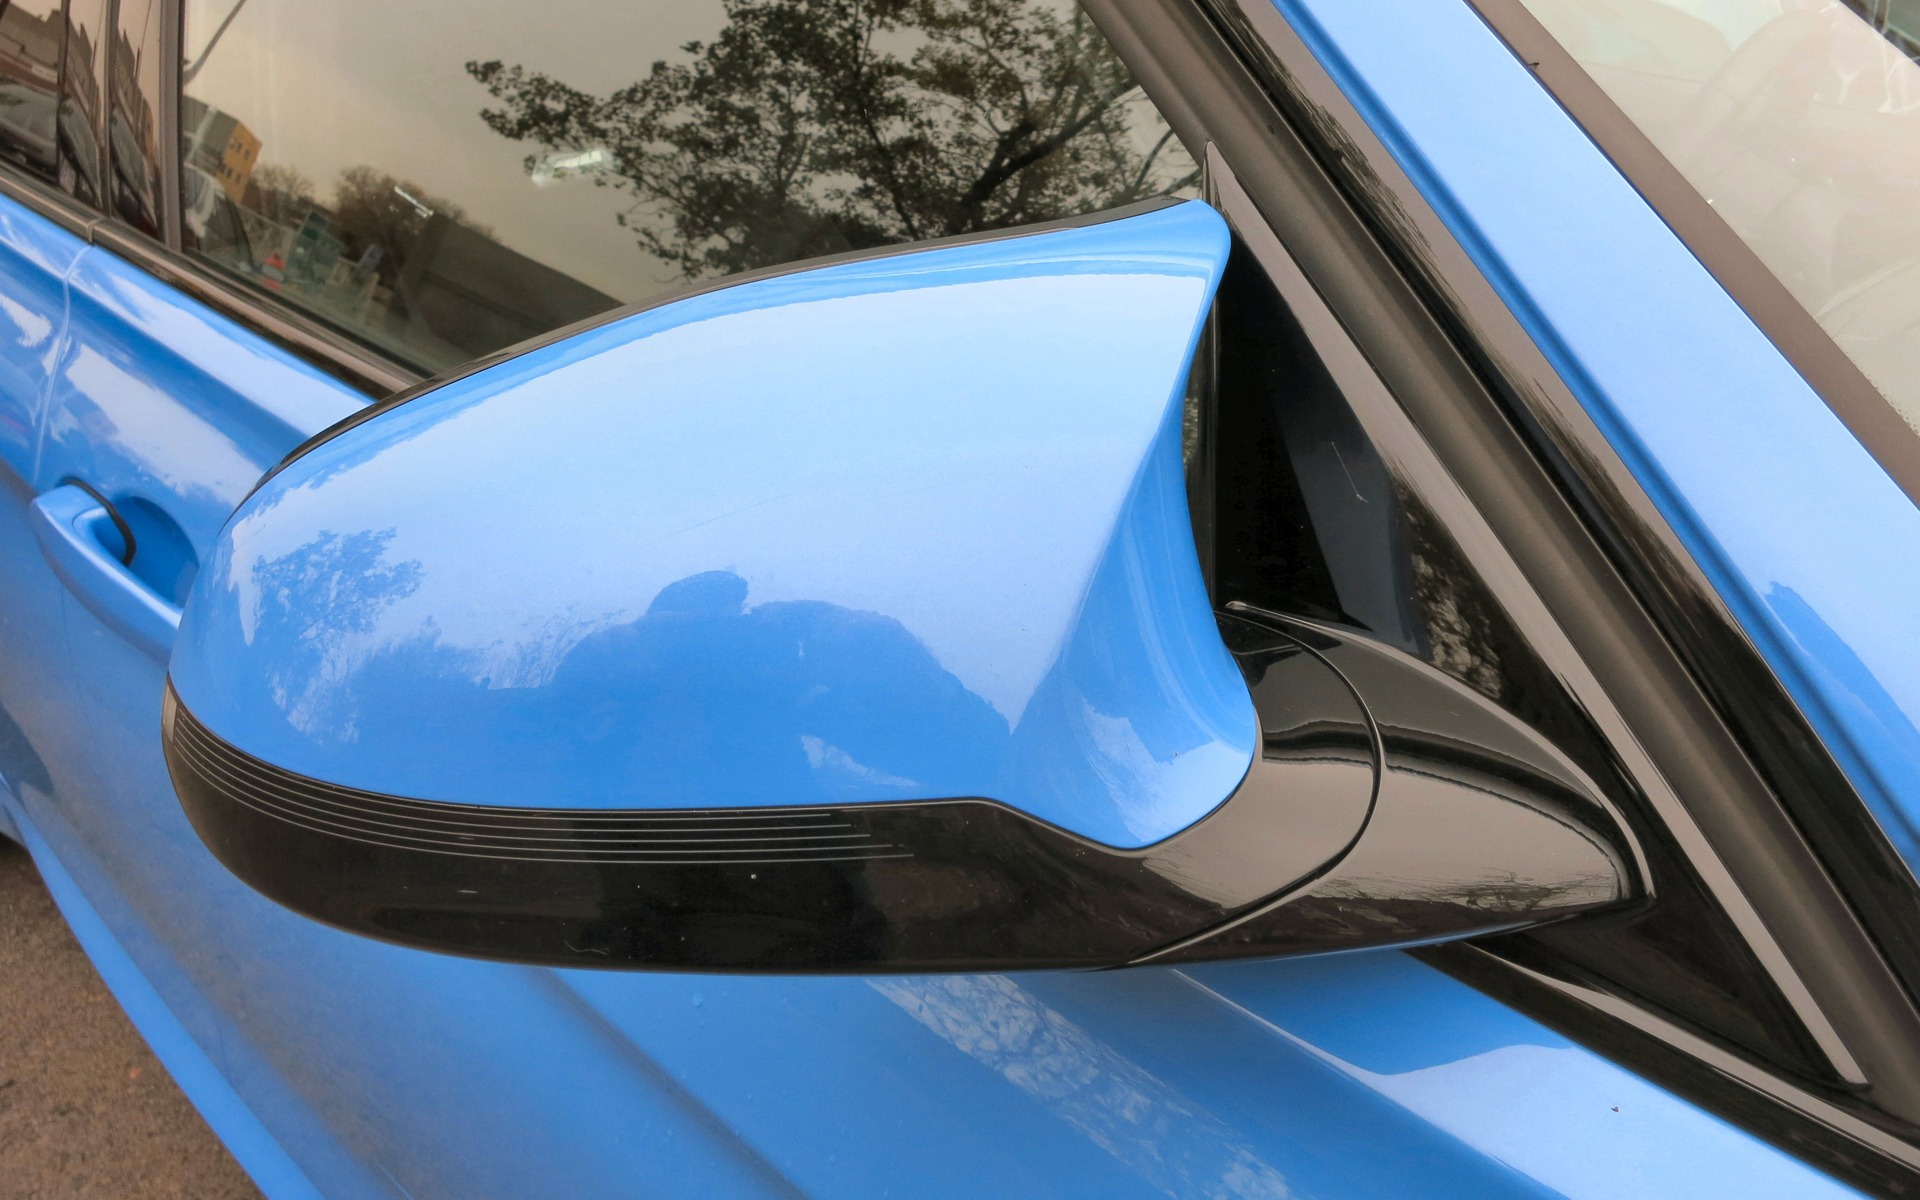 These funky mirrors add a bit of aero pizzazz to the M3's personality.